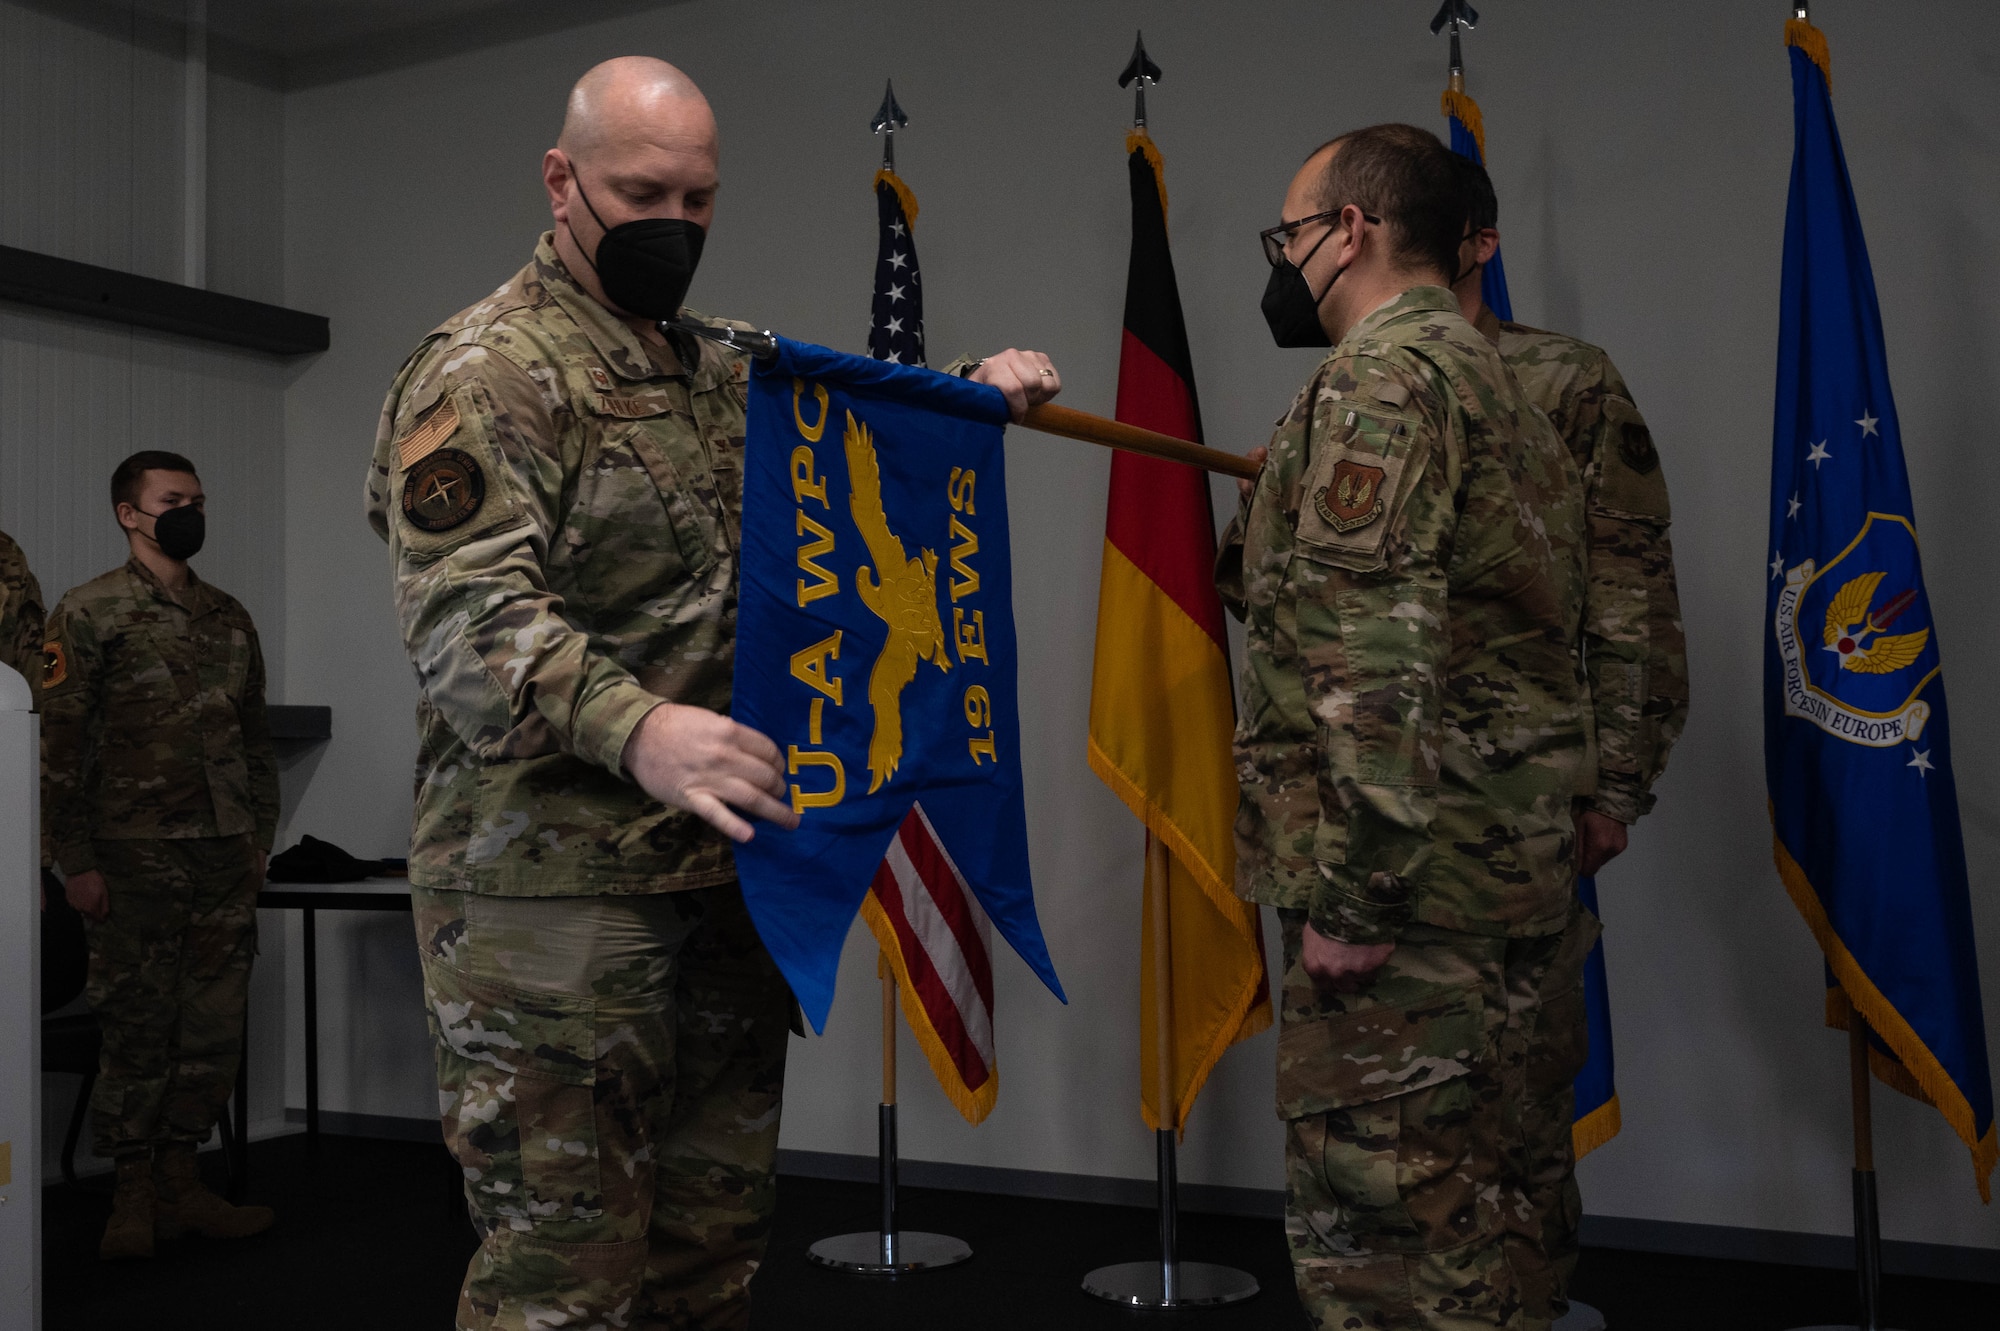 An Airman unfolds the new flag for the squadron.